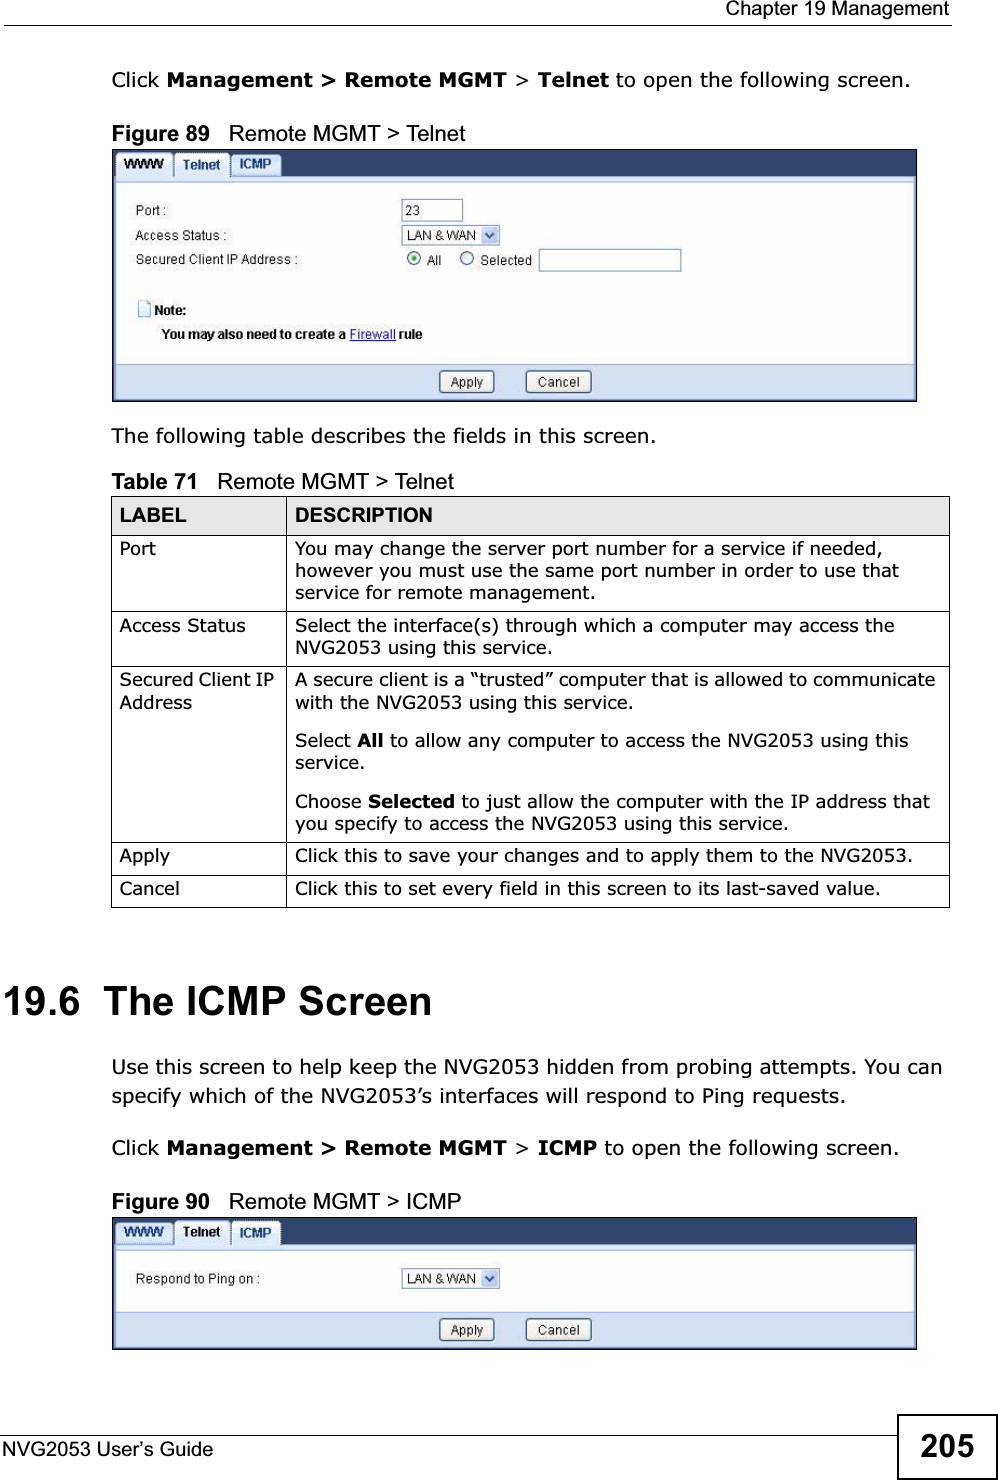  Chapter 19 ManagementNVG2053 User’s Guide 205Click Management &gt; Remote MGMT &gt; Telnet to open the following screen.  Figure 89   Remote MGMT &gt; Telnet The following table describes the fields in this screen. 19.6  The ICMP ScreenUse this screen to help keep the NVG2053 hidden from probing attempts. You can specify which of the NVG2053’s interfaces will respond to Ping requests.Click Management &gt; Remote MGMT &gt; ICMP to open the following screen.  Figure 90   Remote MGMT &gt; ICMP Table 71   Remote MGMT &gt; TelnetLABEL DESCRIPTIONPort You may change the server port number for a service if needed, however you must use the same port number in order to use that service for remote management.Access Status Select the interface(s) through which a computer may access the NVG2053 using this service.Secured Client IP AddressA secure client is a “trusted” computer that is allowed to communicate with the NVG2053 using this service. Select All to allow any computer to access the NVG2053 using this service.Choose Selected to just allow the computer with the IP address that you specify to access the NVG2053 using this service.Apply Click this to save your changes and to apply them to the NVG2053.Cancel Click this to set every field in this screen to its last-saved value.